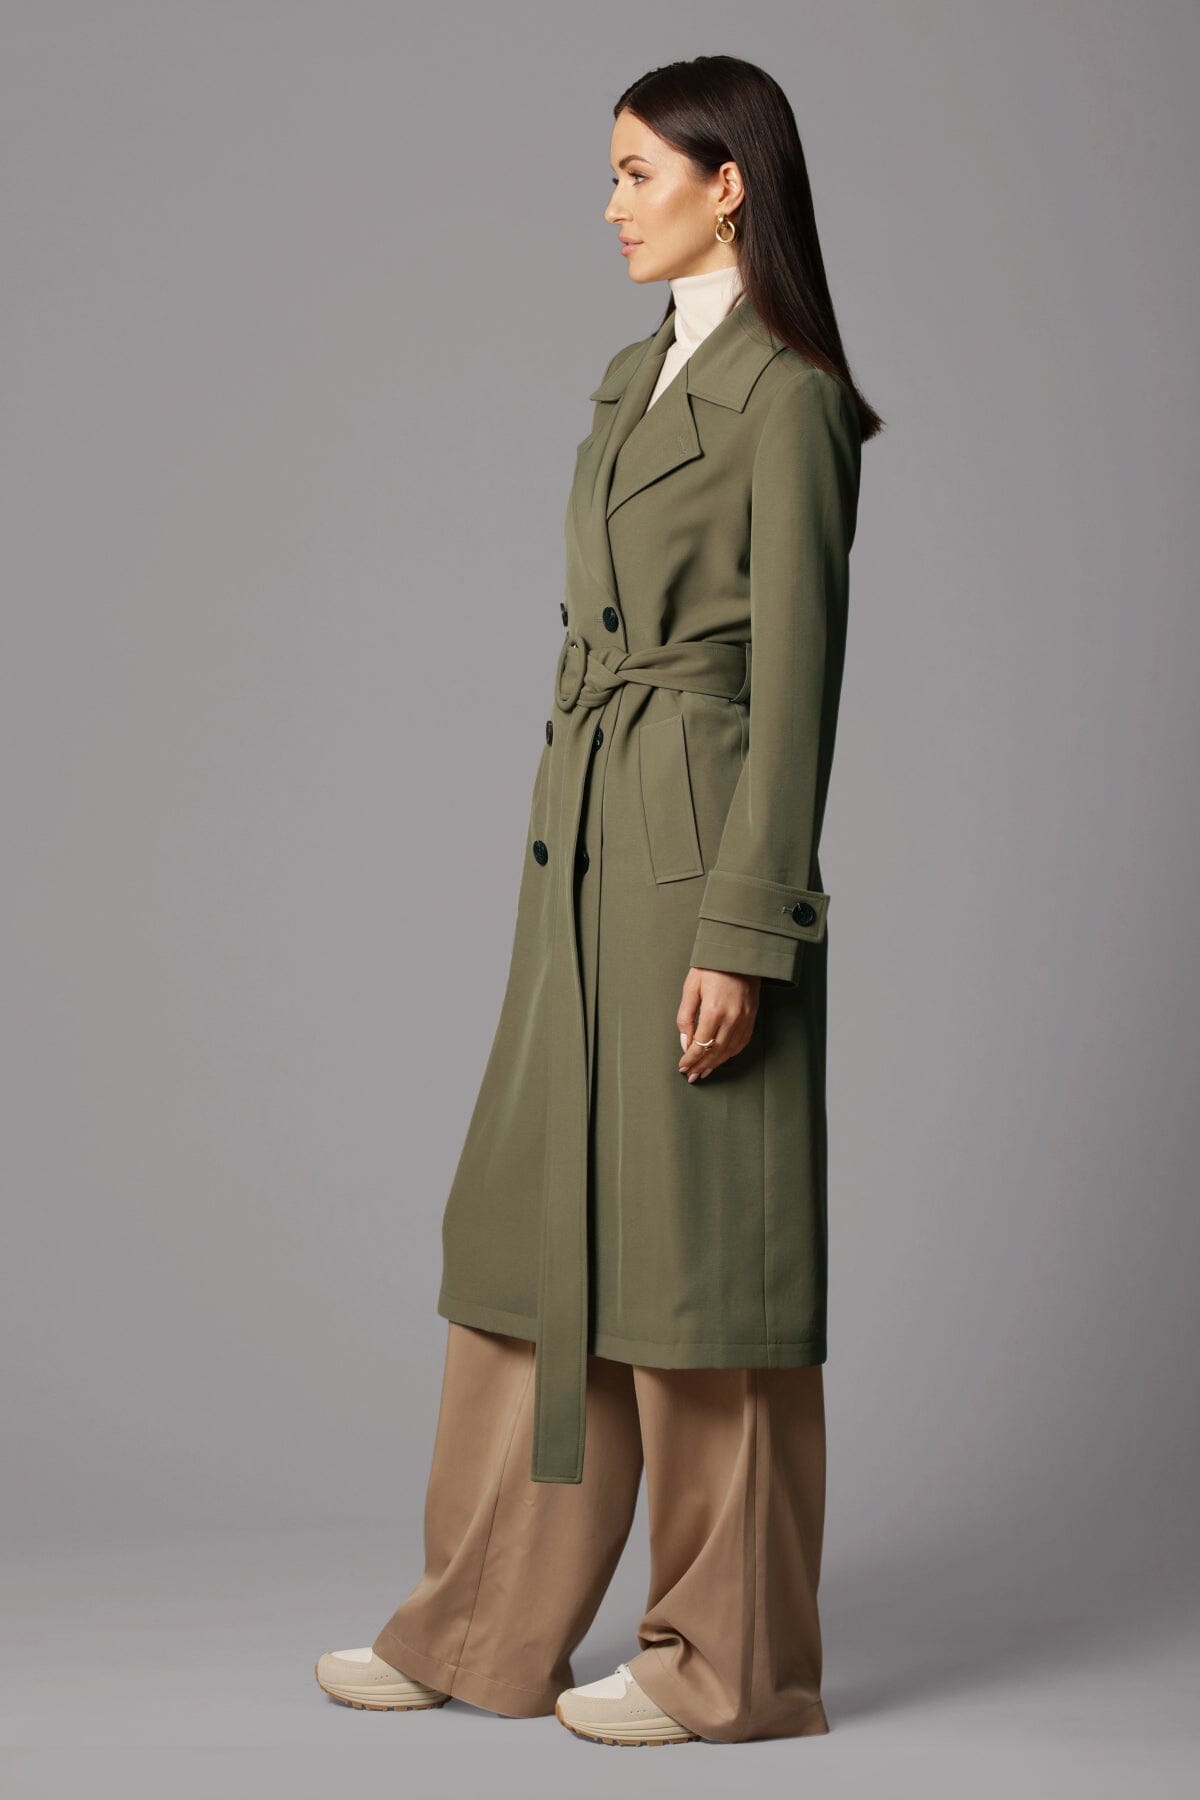 double breasted relaxed stretch crepe duster trench coat olive green - women's figure flattering designer fashion long coats outerwear